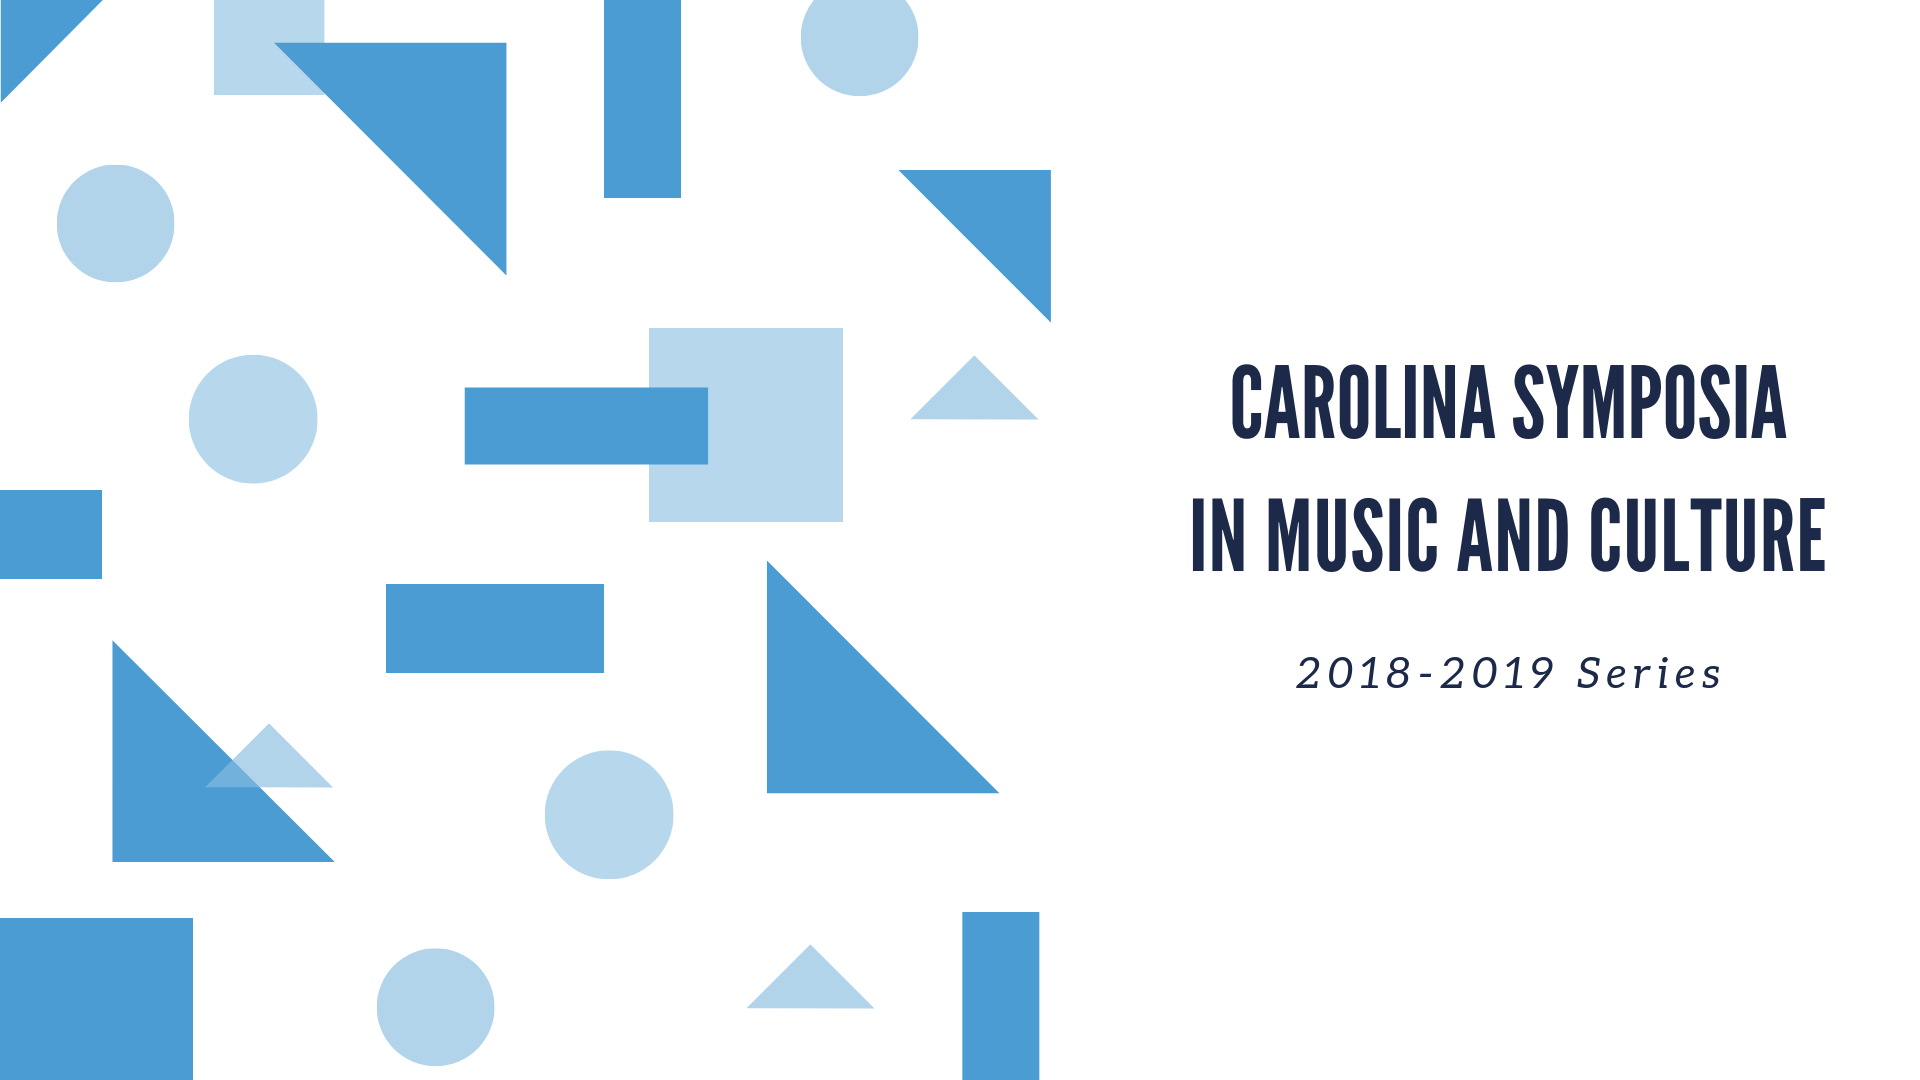 Poster Image, title is: "Carolina Symposia in Music and Culture"